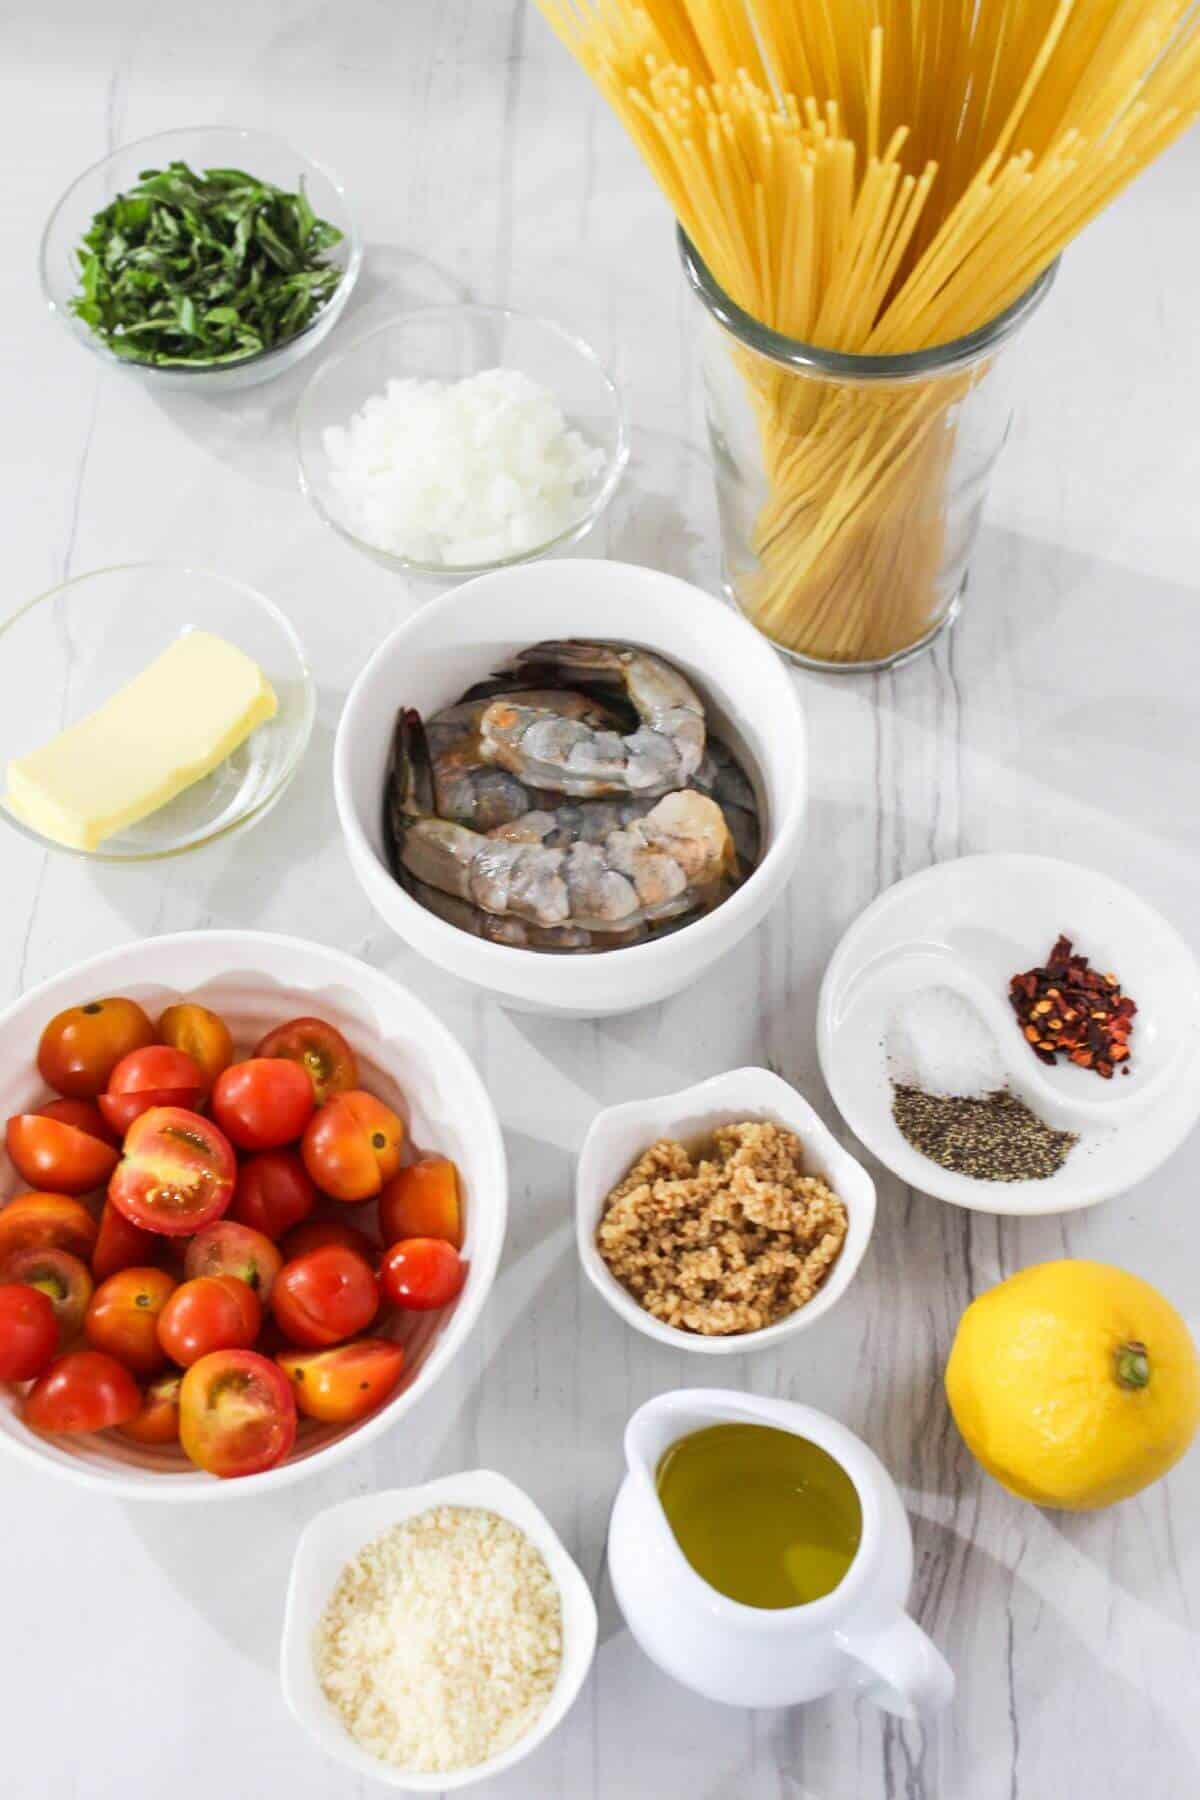 Ingredients for a pasta dish with shrimp, tomatoes and basil.